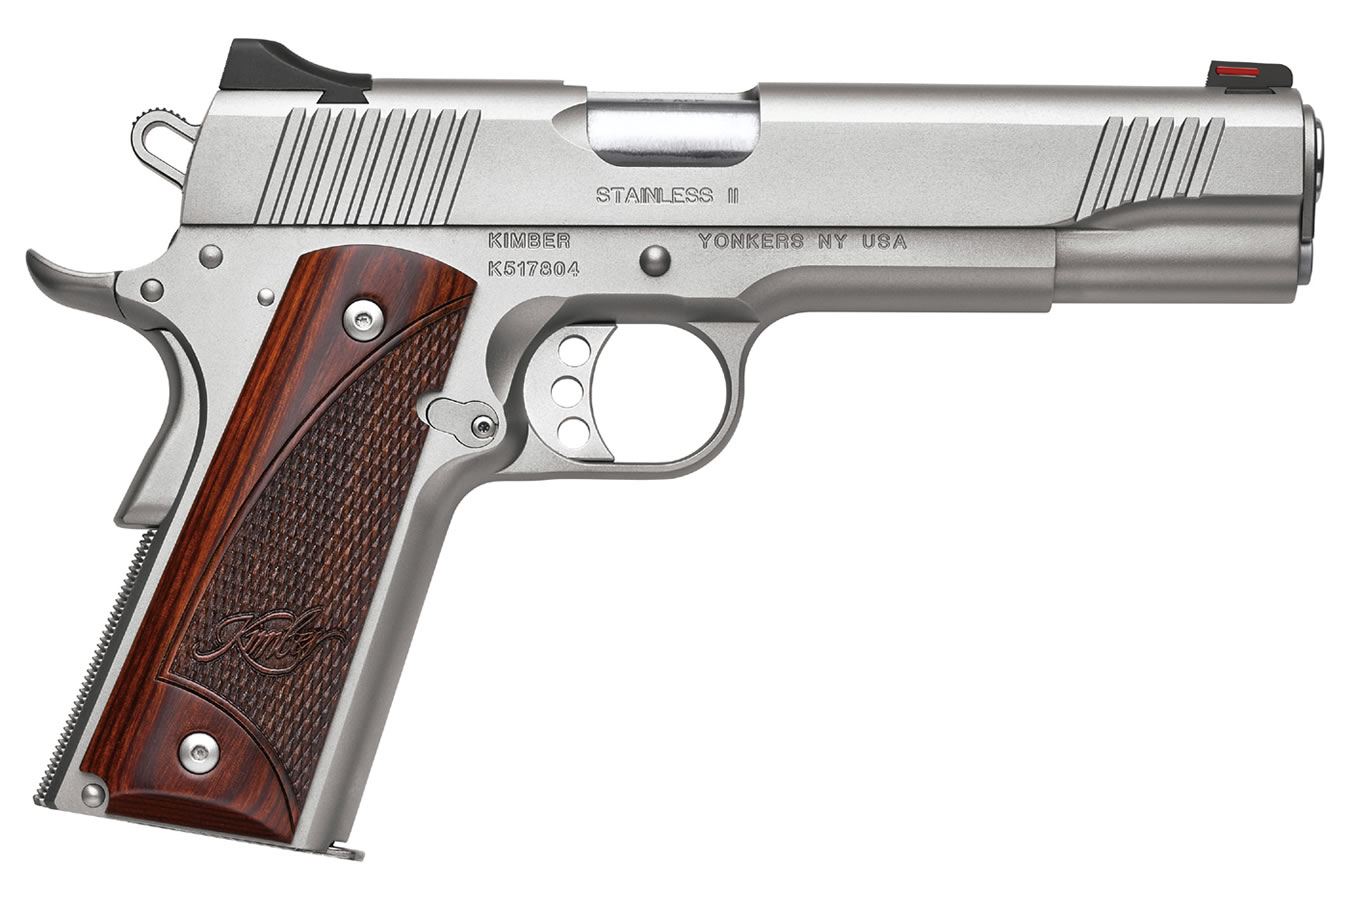 No. 19 Best Selling: KIMBER STAINLESS II 9MM LUGER